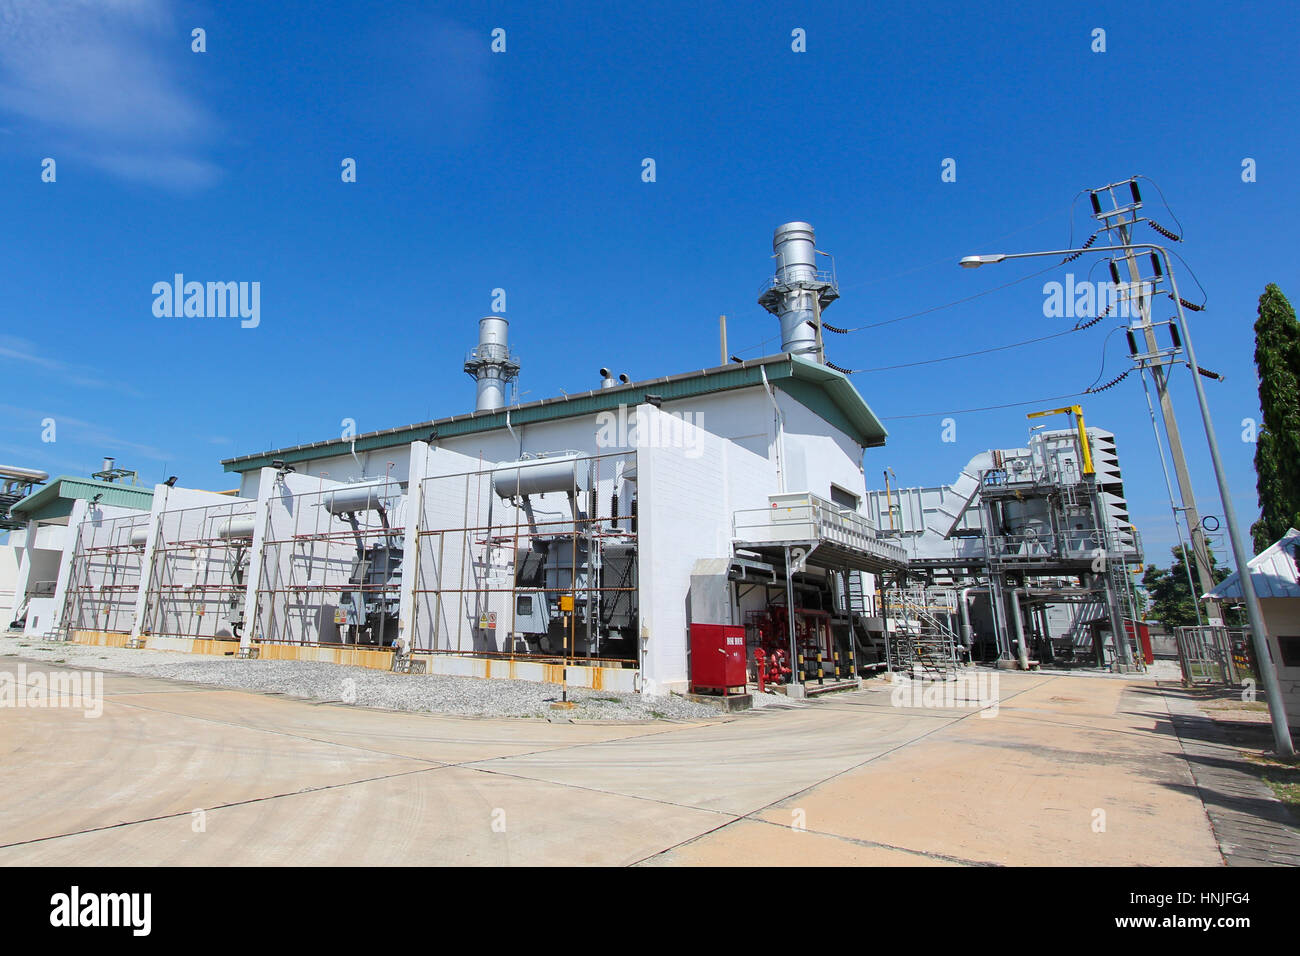 High-voltage power transformer in industrial power plant with blue sky Stock Photo